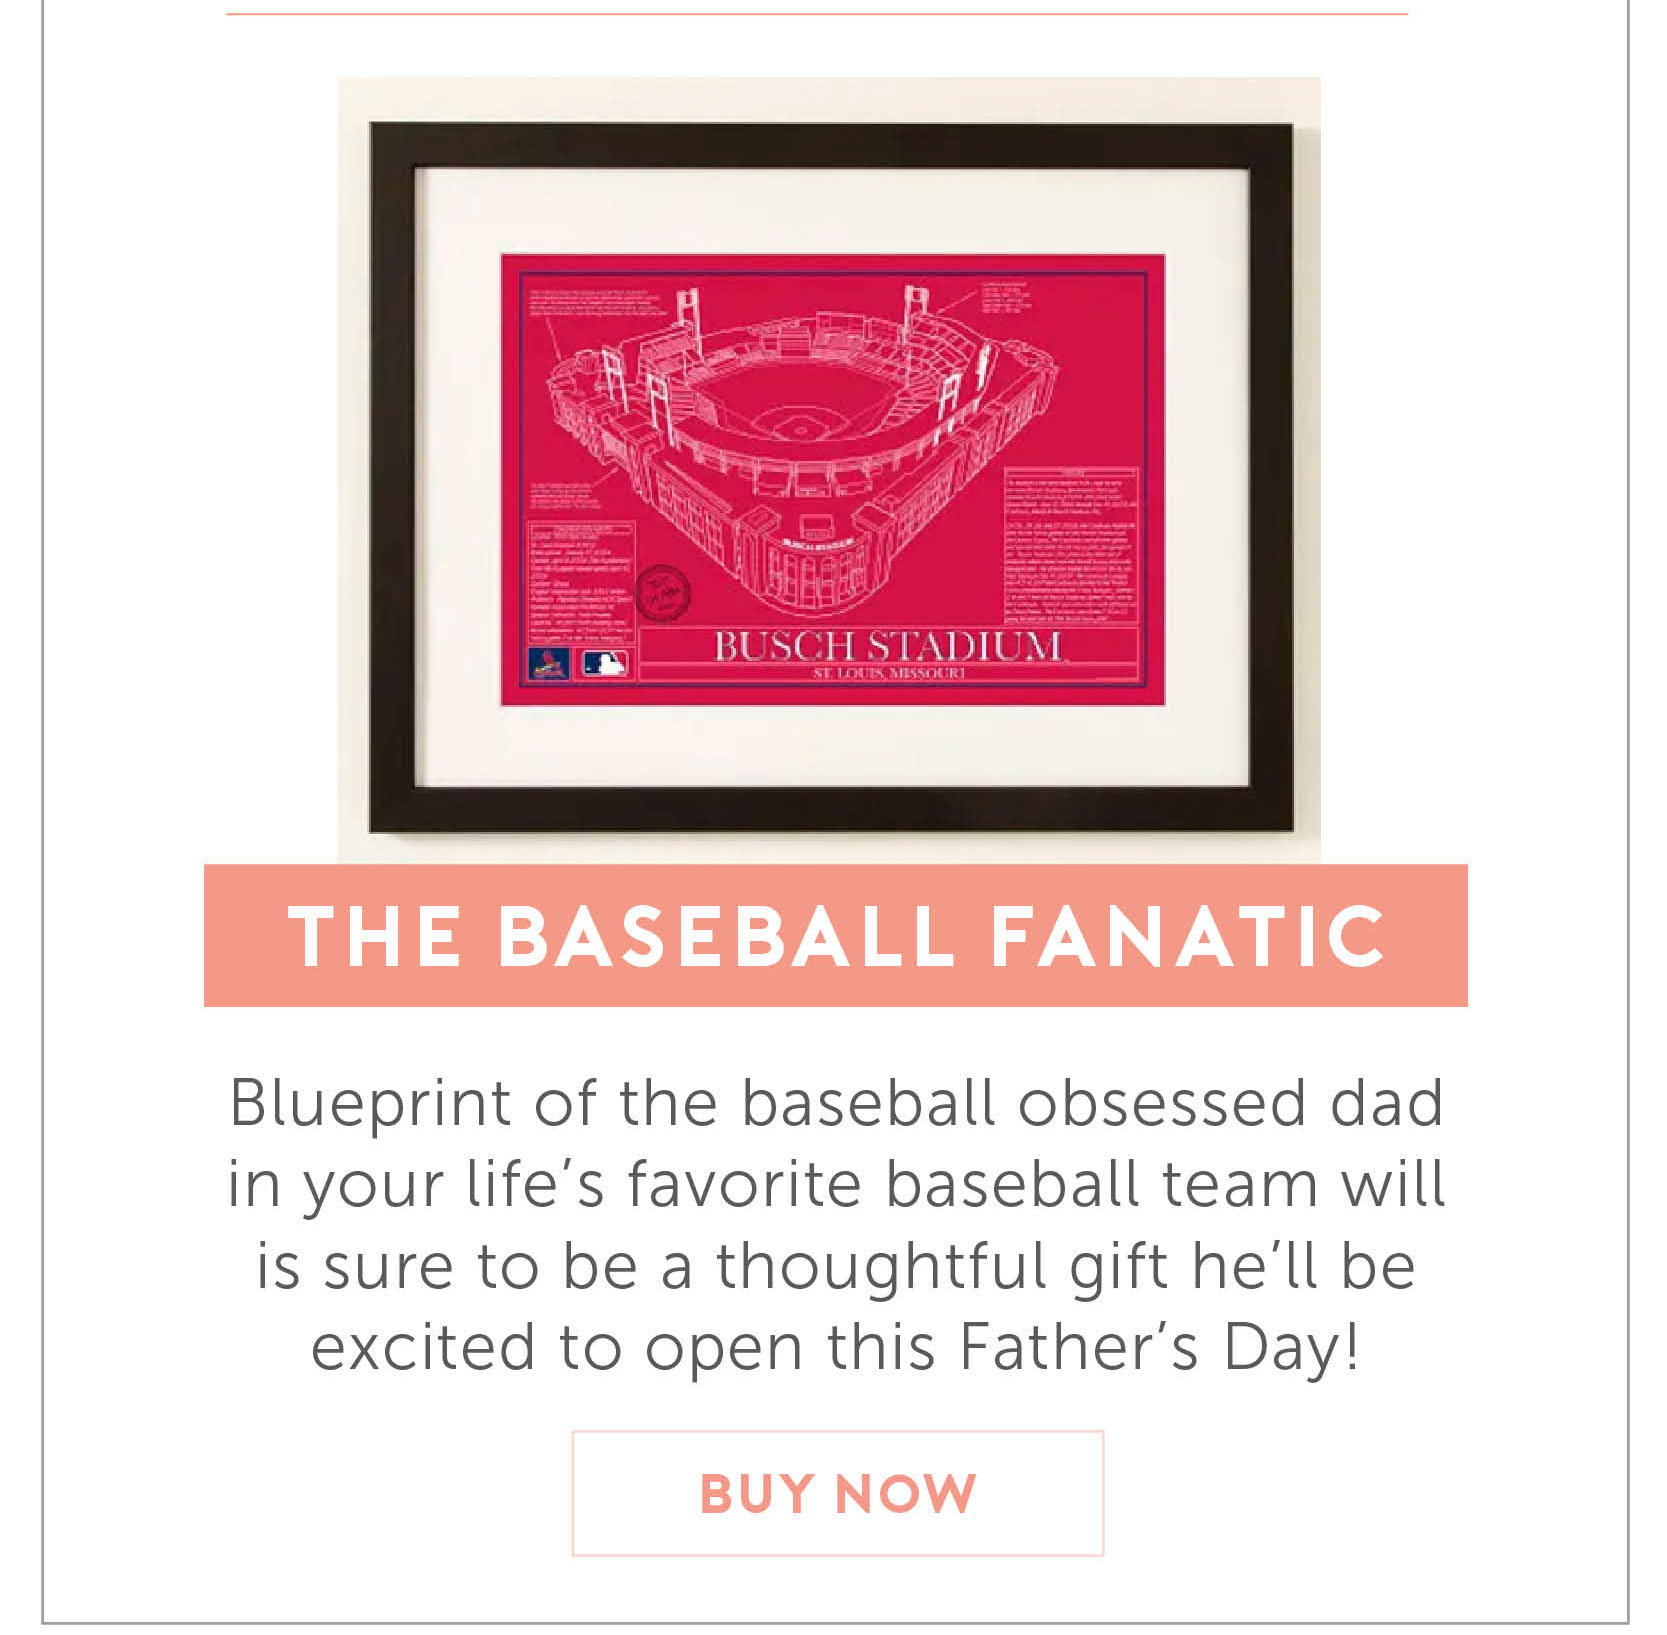 For The Baseball fanatic. Blueprint of the baseball obsessed dad in your life’s favorite baseball team will is sure to be a thoughtful gift he’ll be excited to open this Father’s Day!